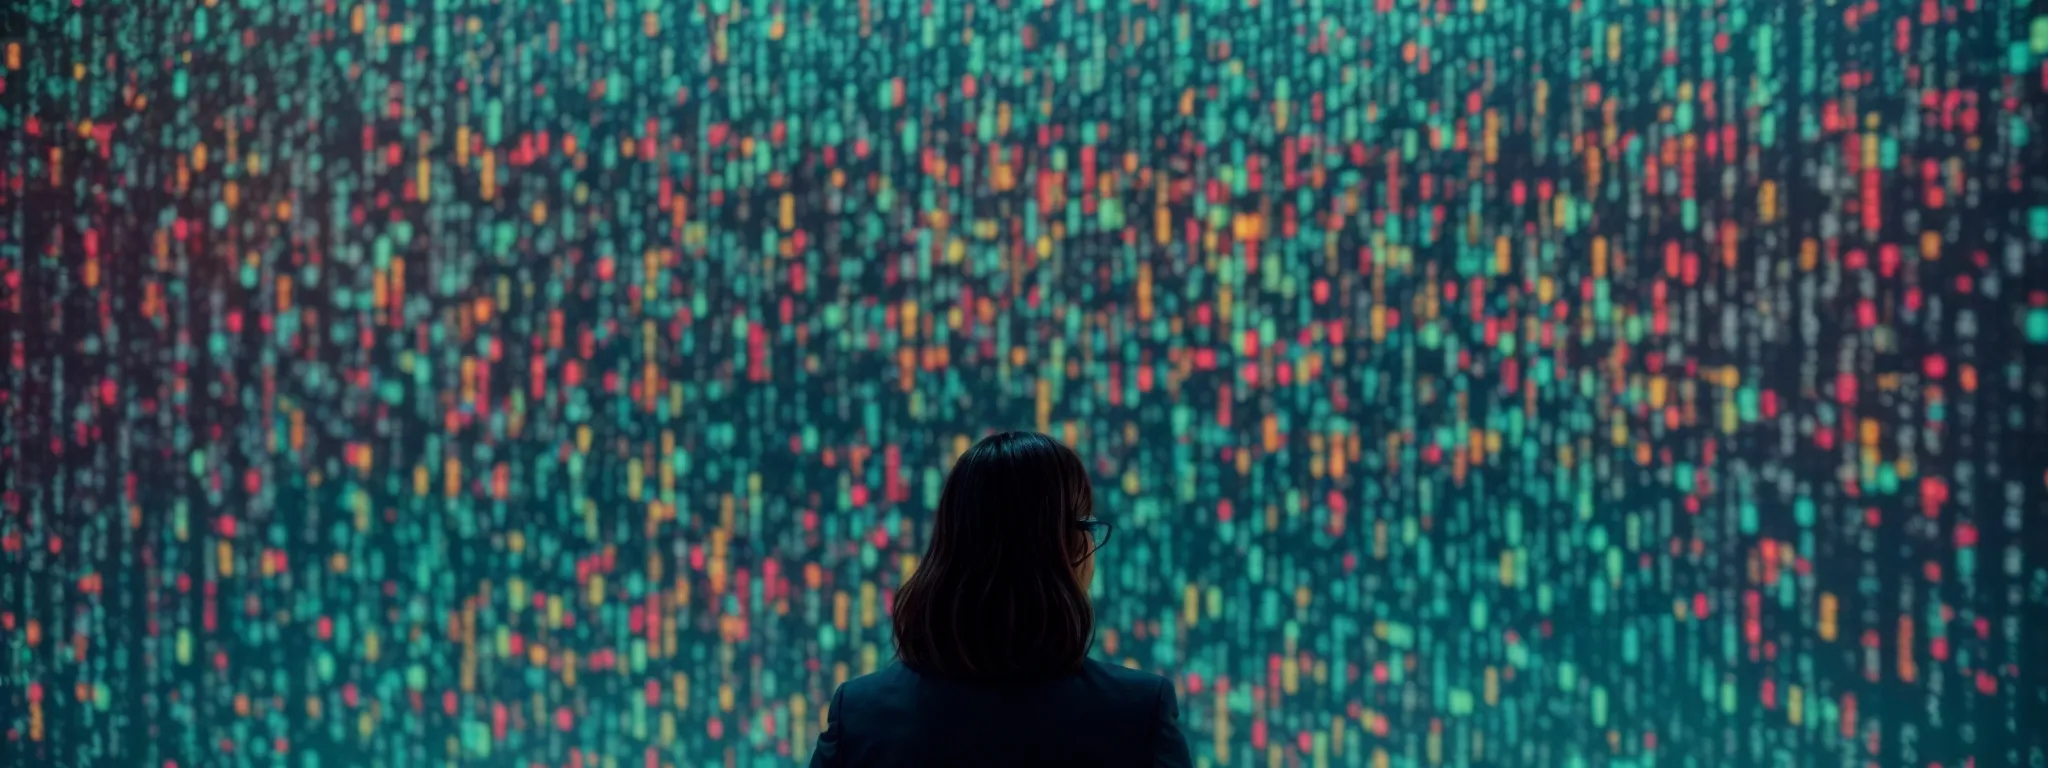 a marketer analyzing a colorful keyword data visualization on a large screen.